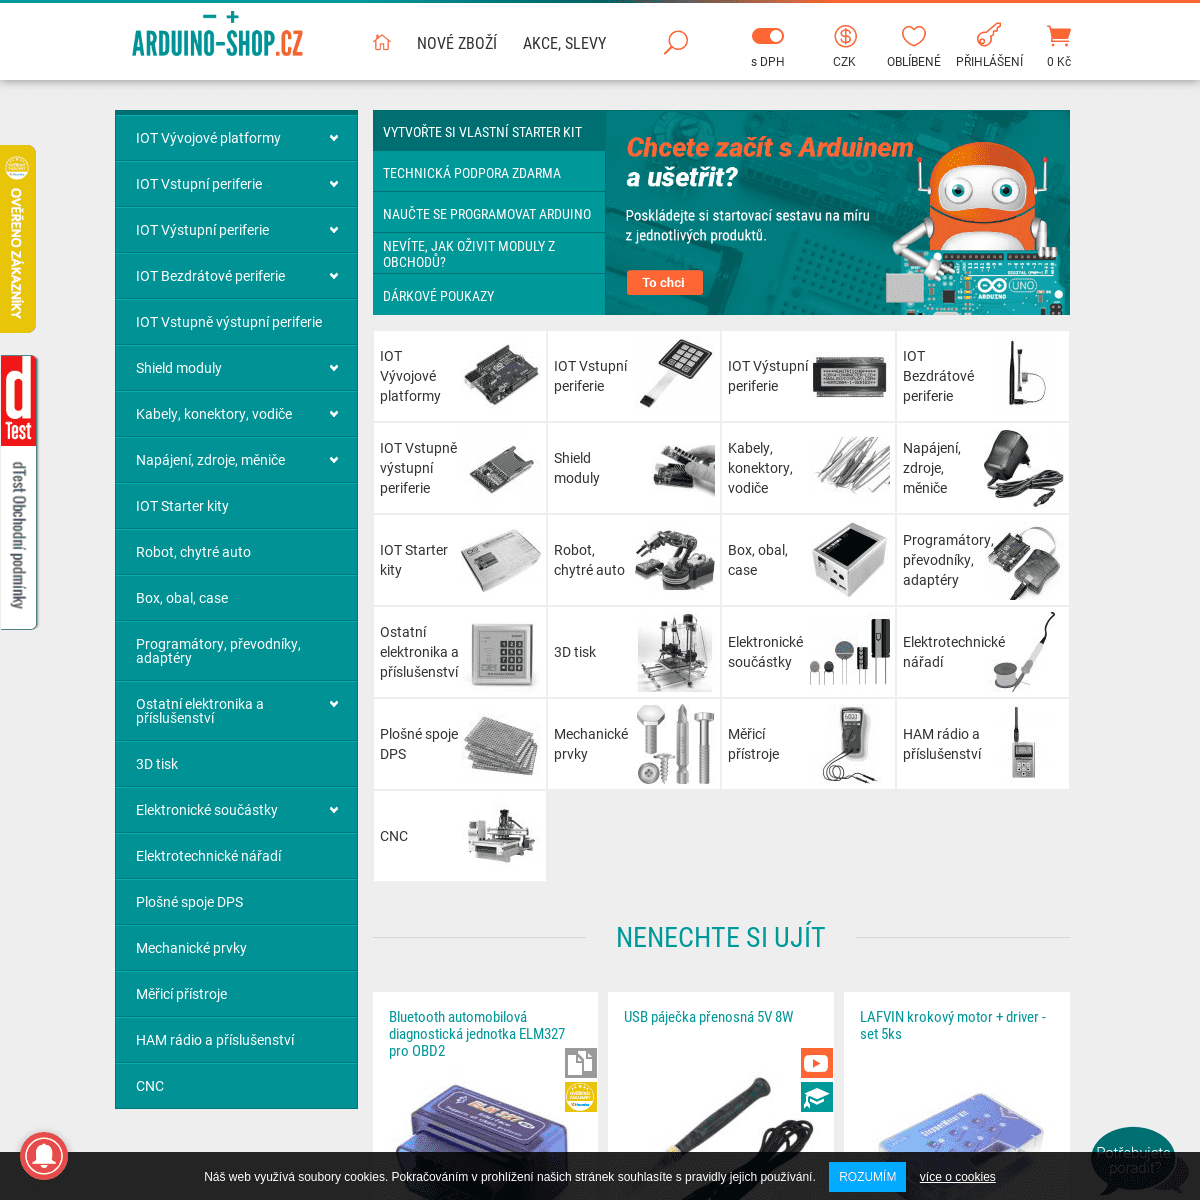 A complete backup of arduino-shop.cz